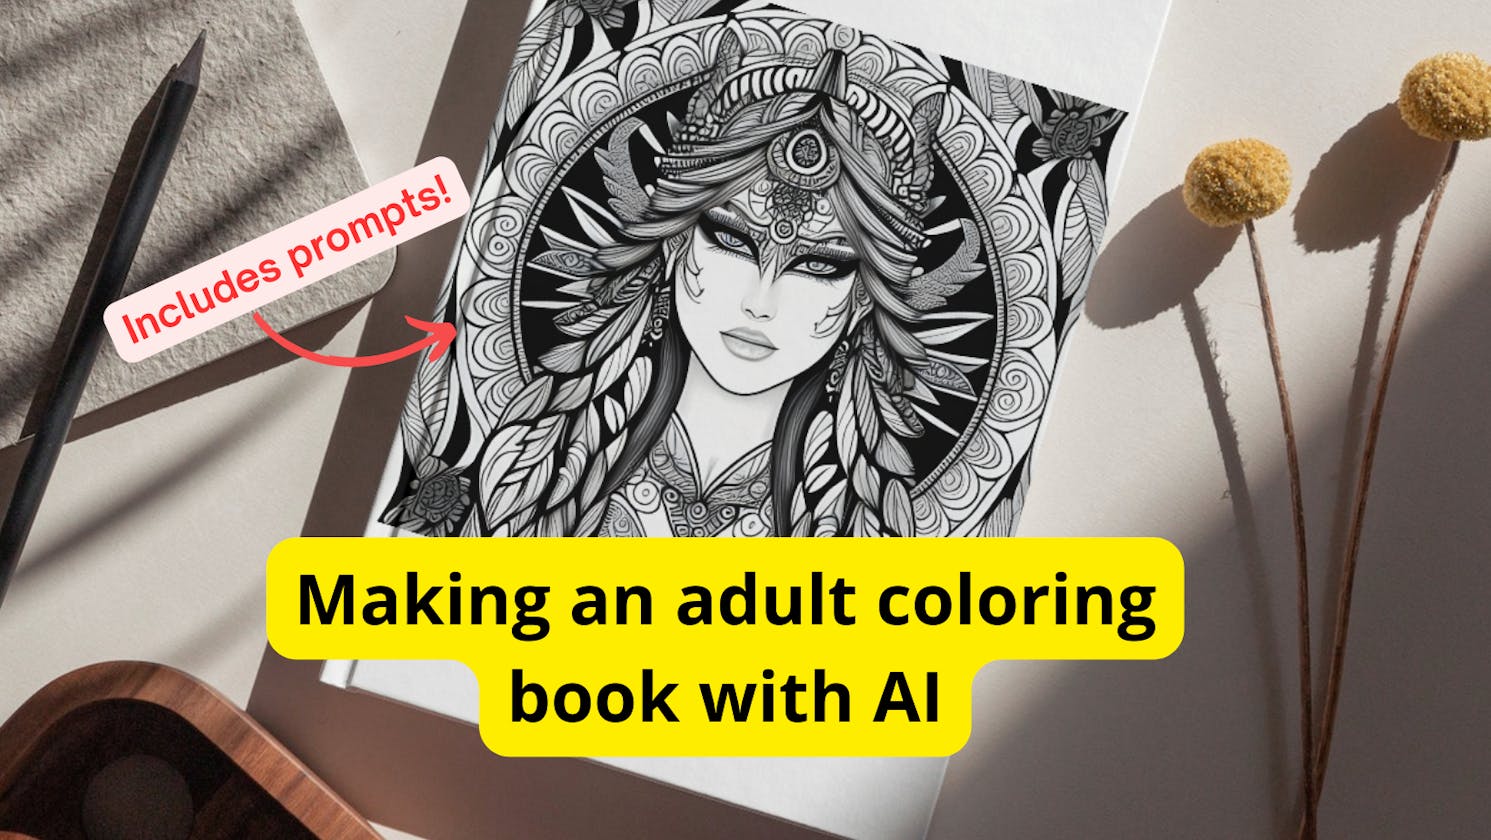 Using Hasdx to create an AI-generated adult coloring book (includes prompts!)